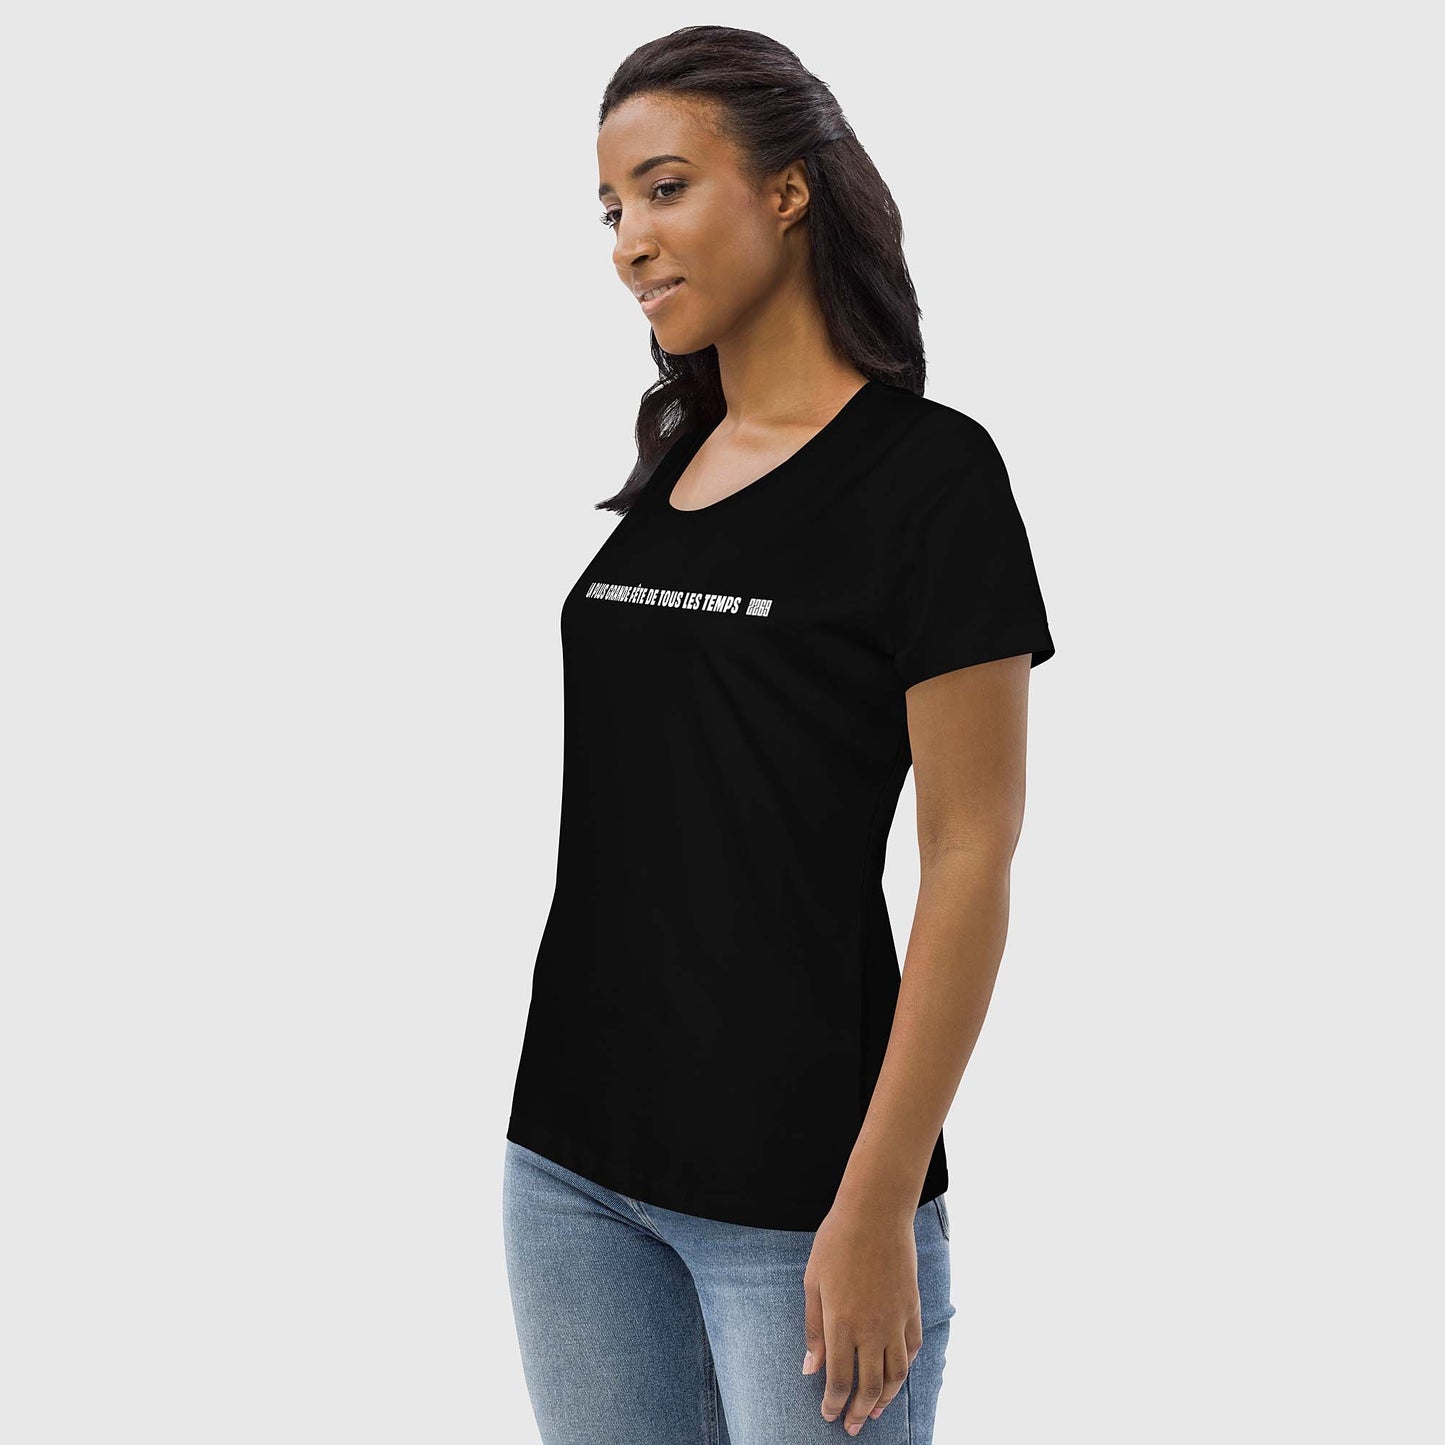 Women's black fitted organic cotton t-shirt with French 2269 party message